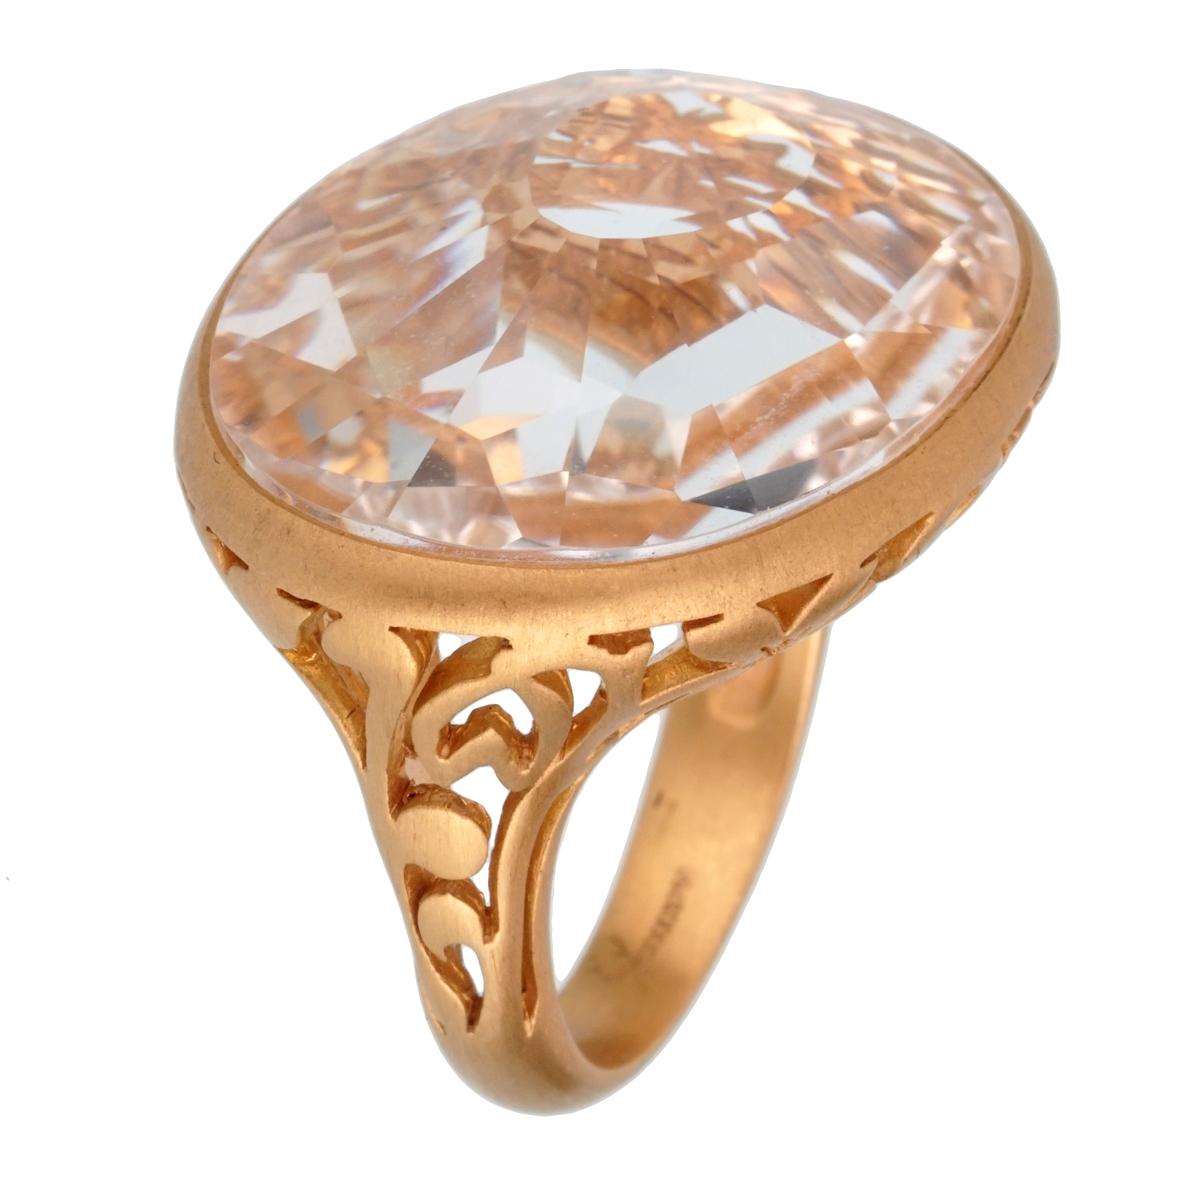 Pomellato 10 Carat White Quartz Cocktail Rose Gold Ring In New Condition For Sale In Feasterville, PA